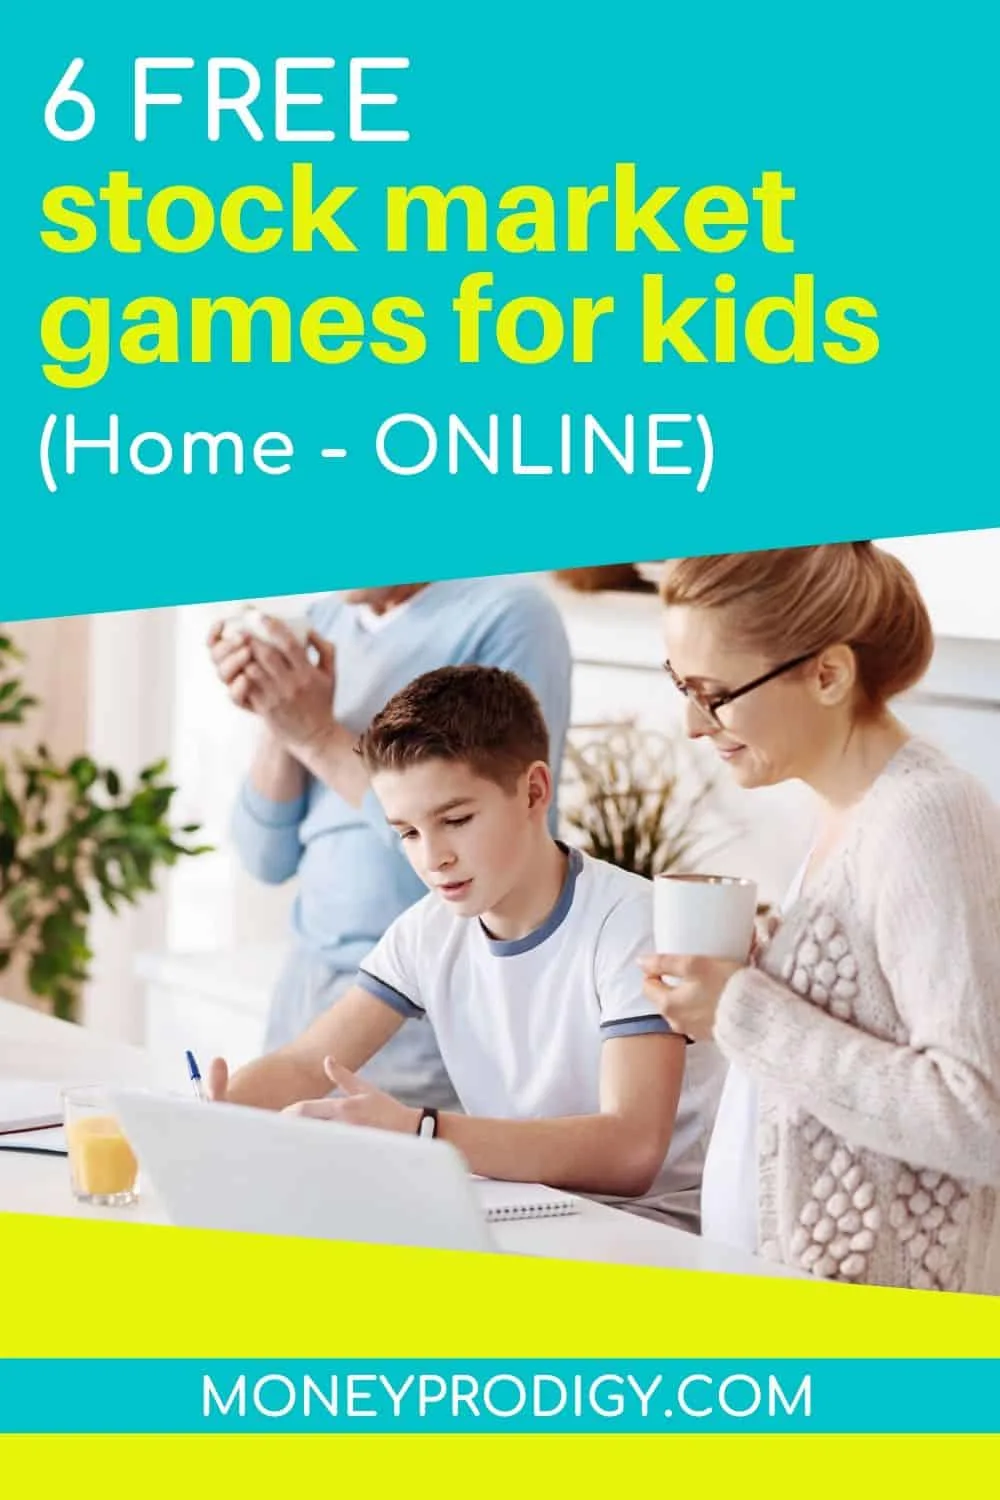 teen child with his mother working on investing game online, text overlay 